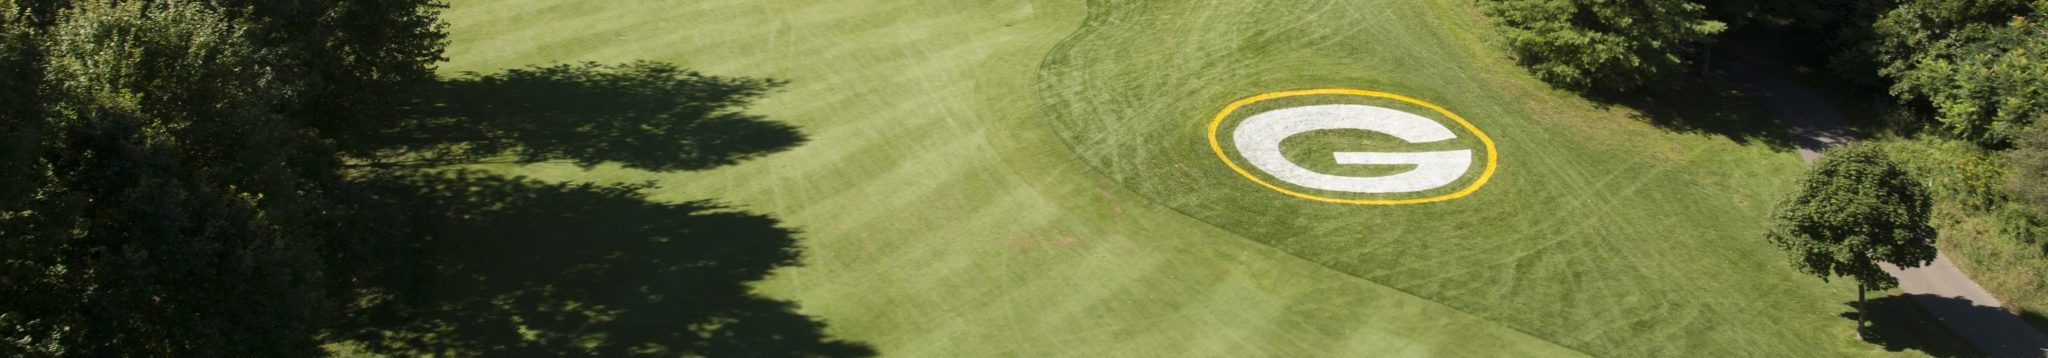 View of golf course with Green Bay Packers Logo